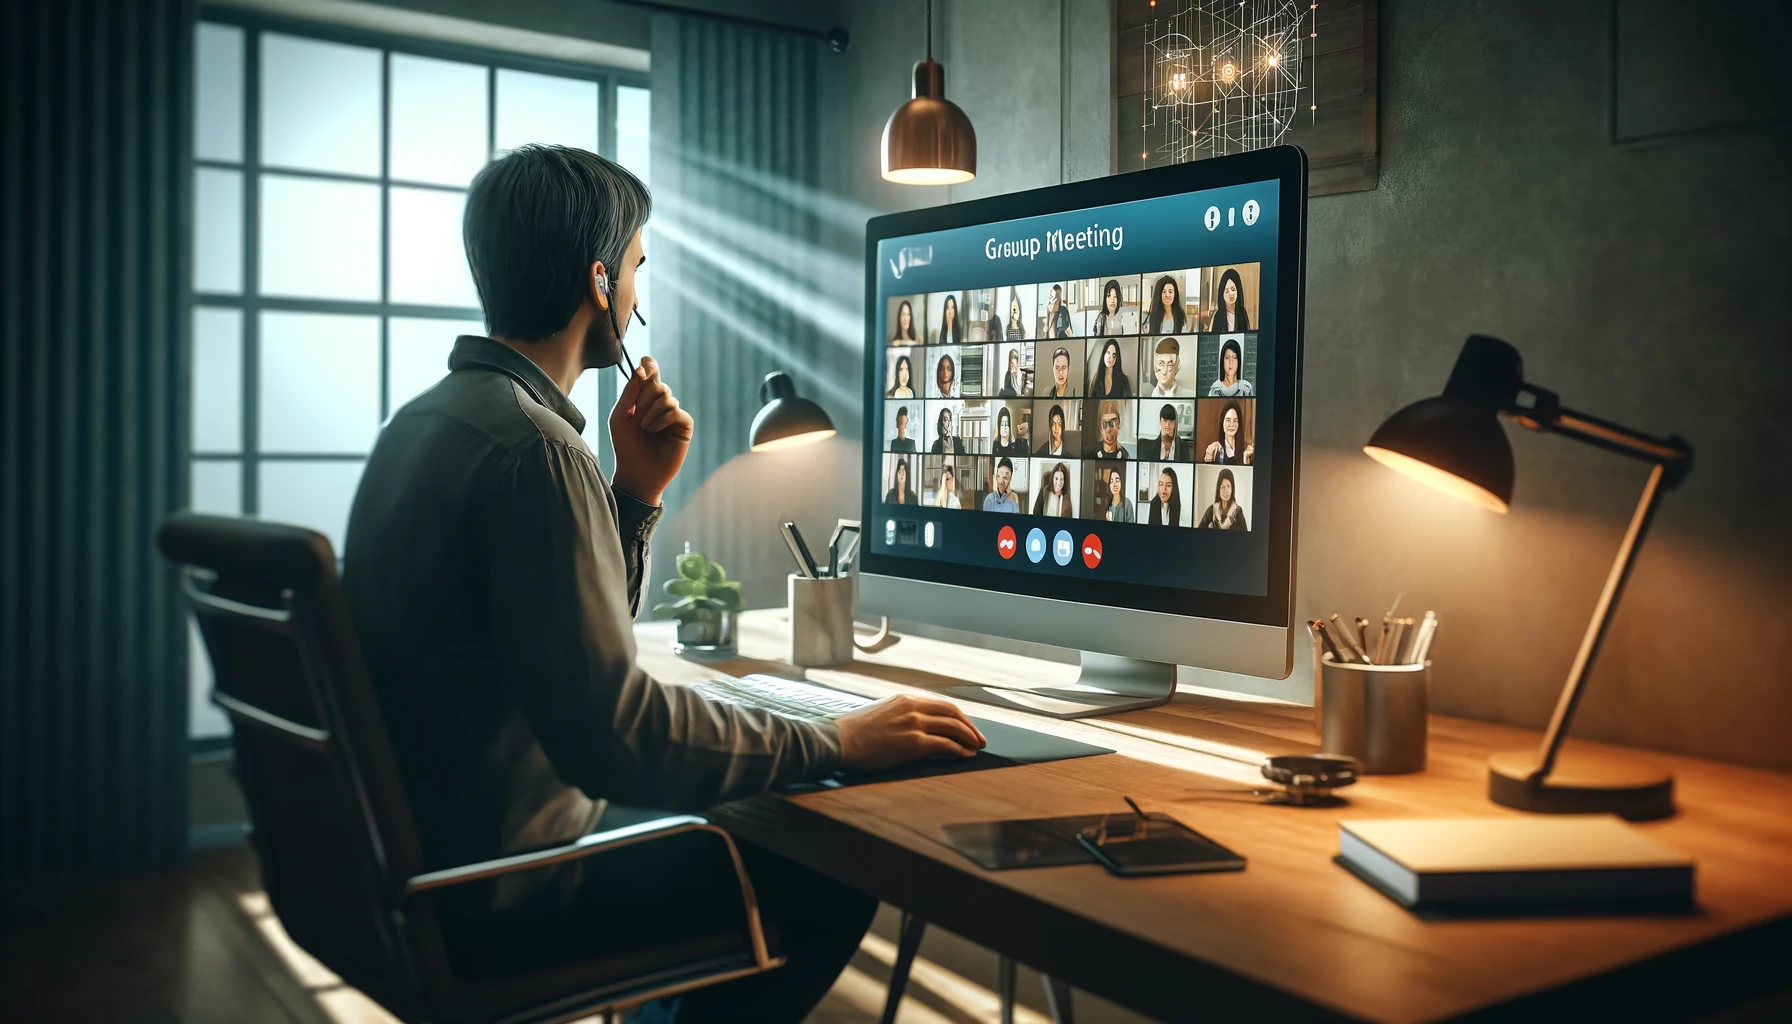 a person participating in an online group meeting from a modern home office. The monitor displays a video conferencing interface with icons for multiple participants, emphasizing the collaborative nature of the discussion.